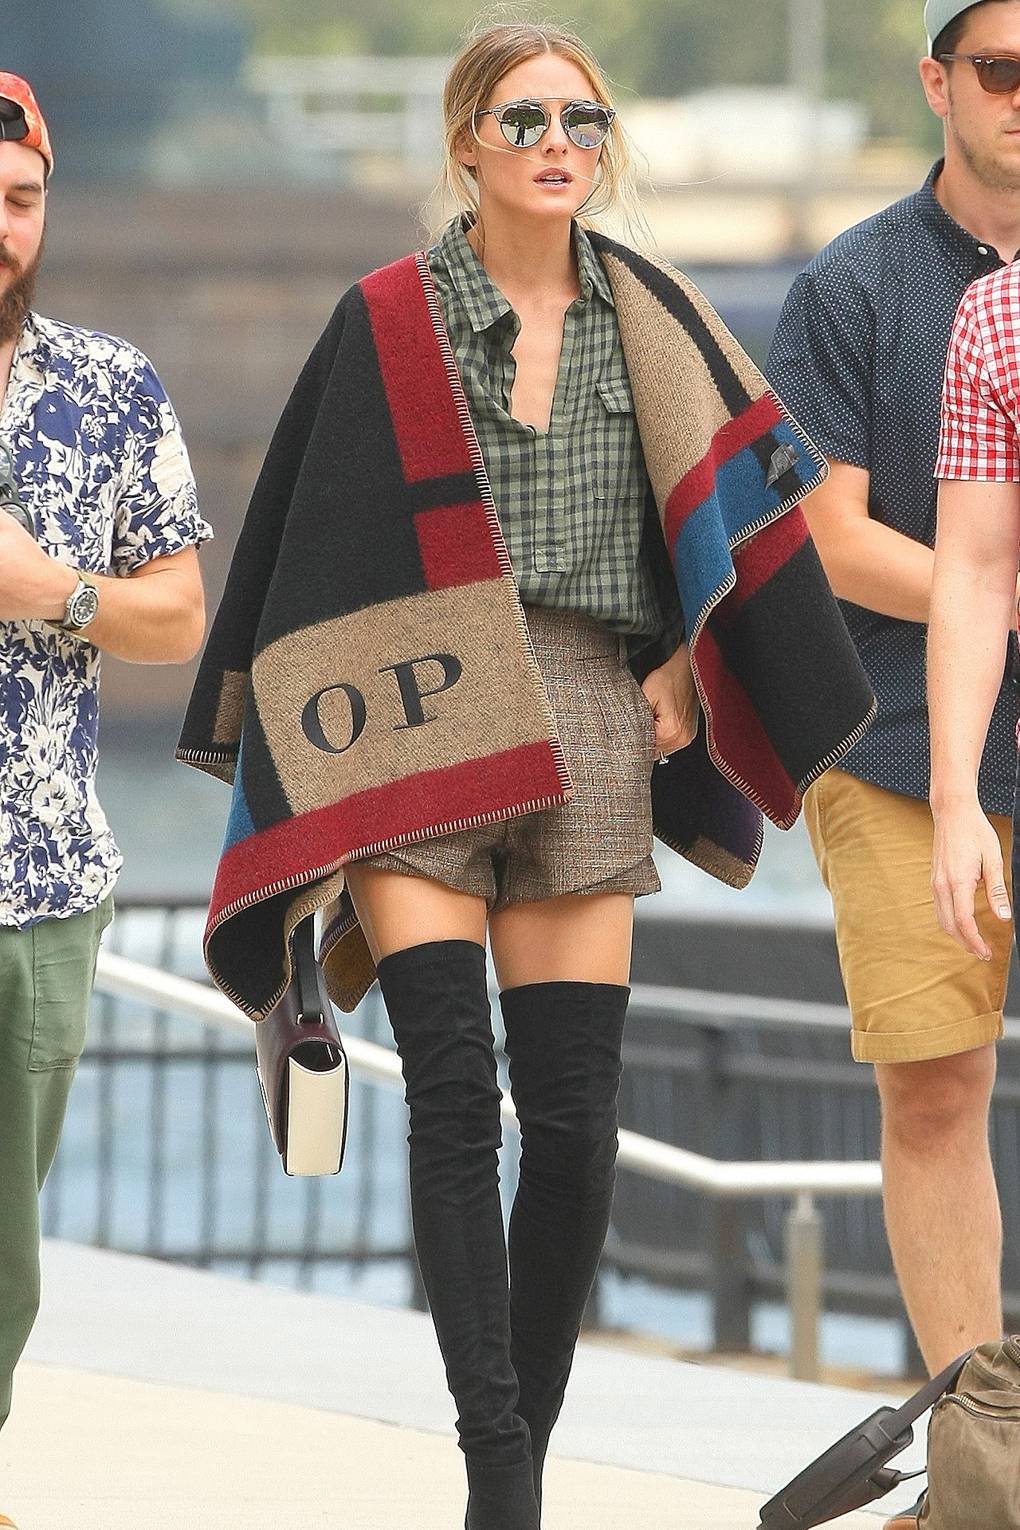 burberry scarf initials